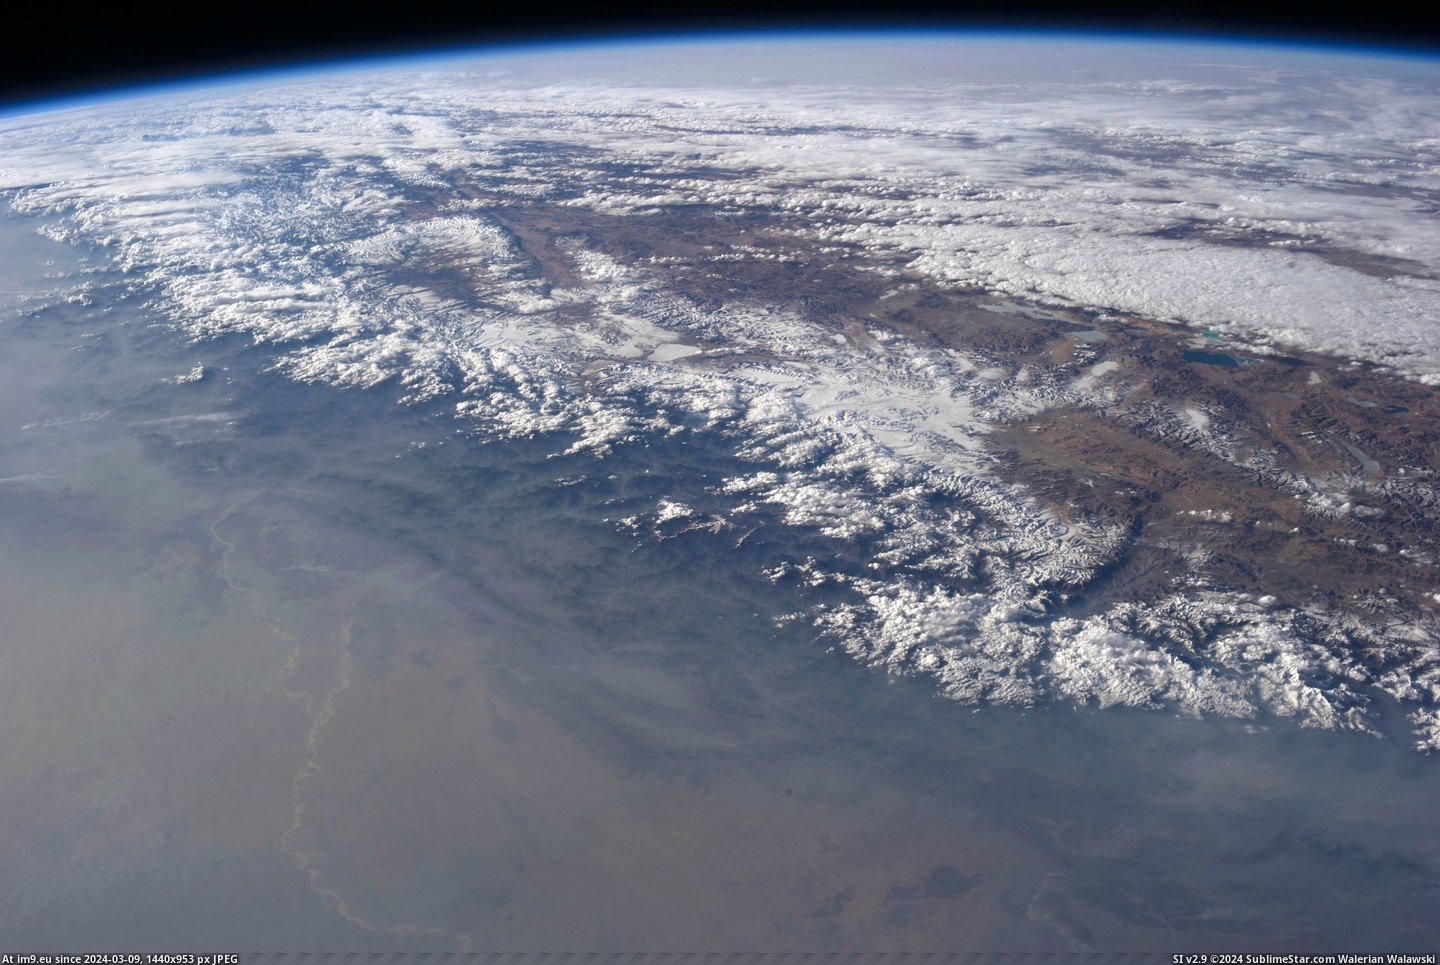 #Time #Not #Himalayas #Rendered #Space #Computer [Pics] The Himalayas from space. This time, not rendered on a computer, and actually from space. Pic. (Image of album My r/PICS favs))